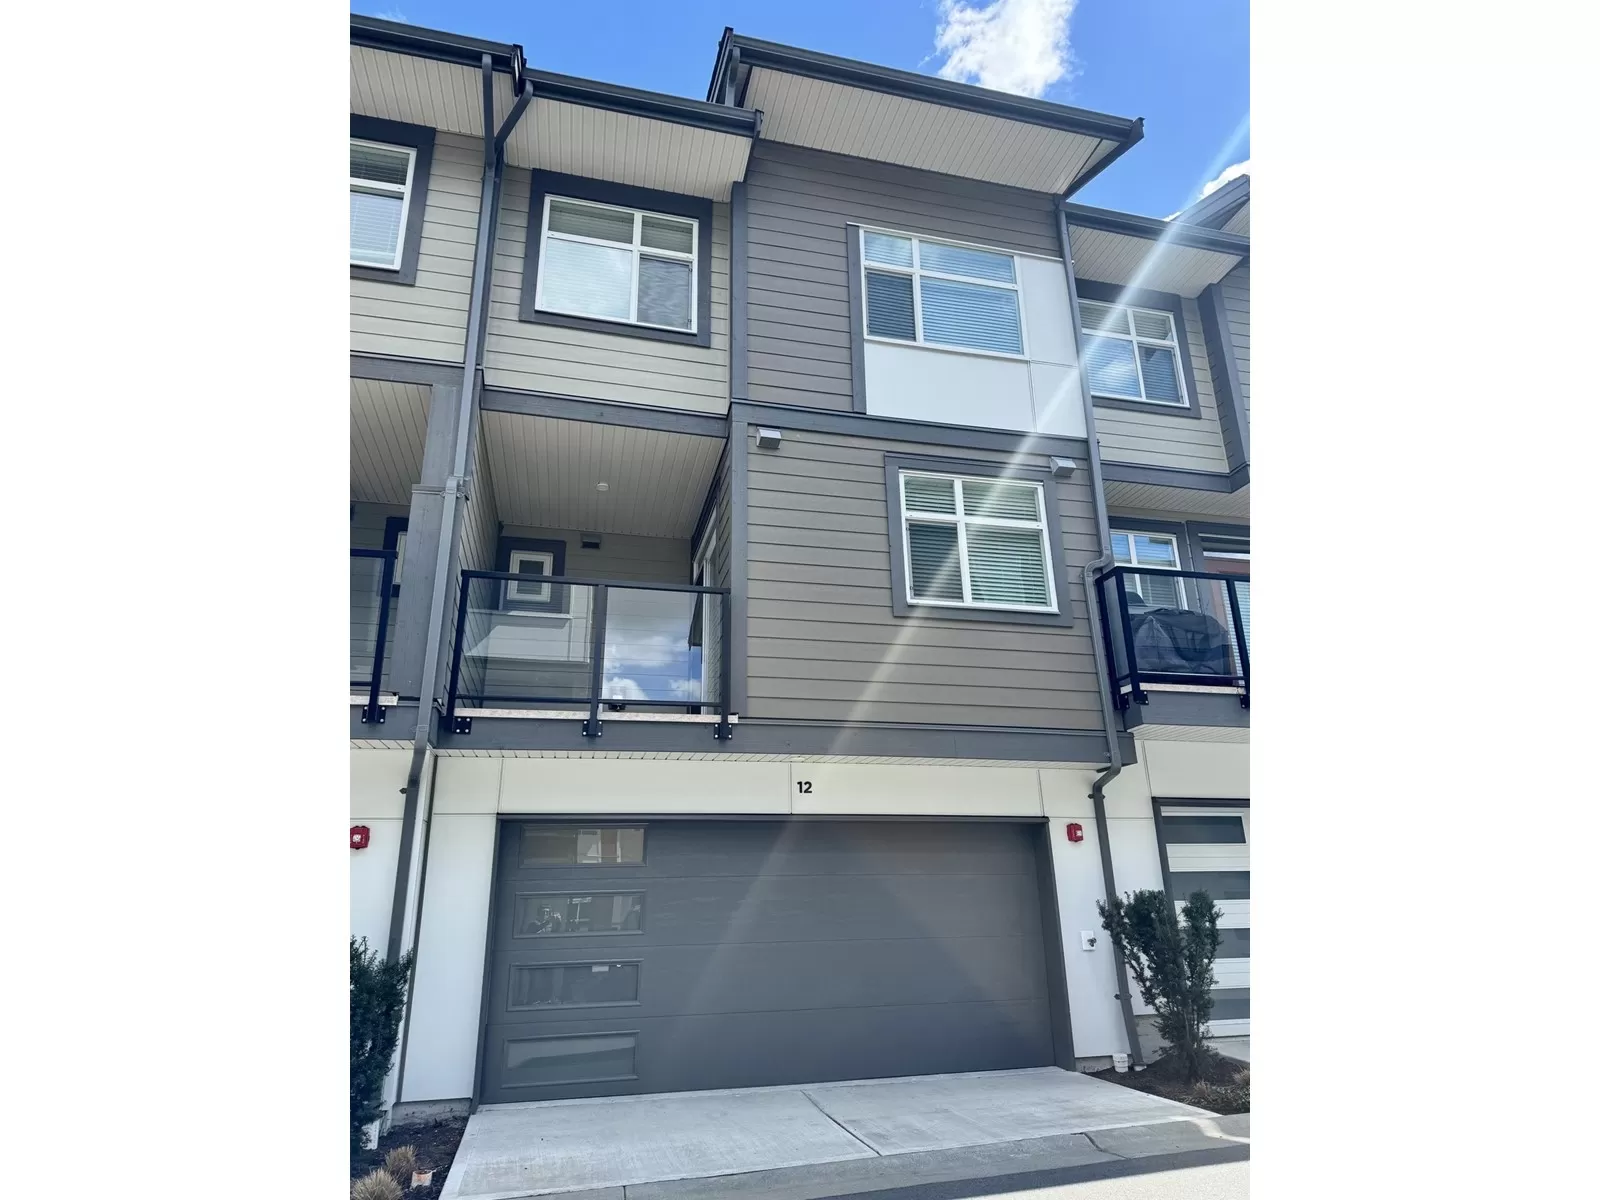 Row / Townhouse for rent: 12 8430 203a Street, Langley, British Columbia V2Y 3N4